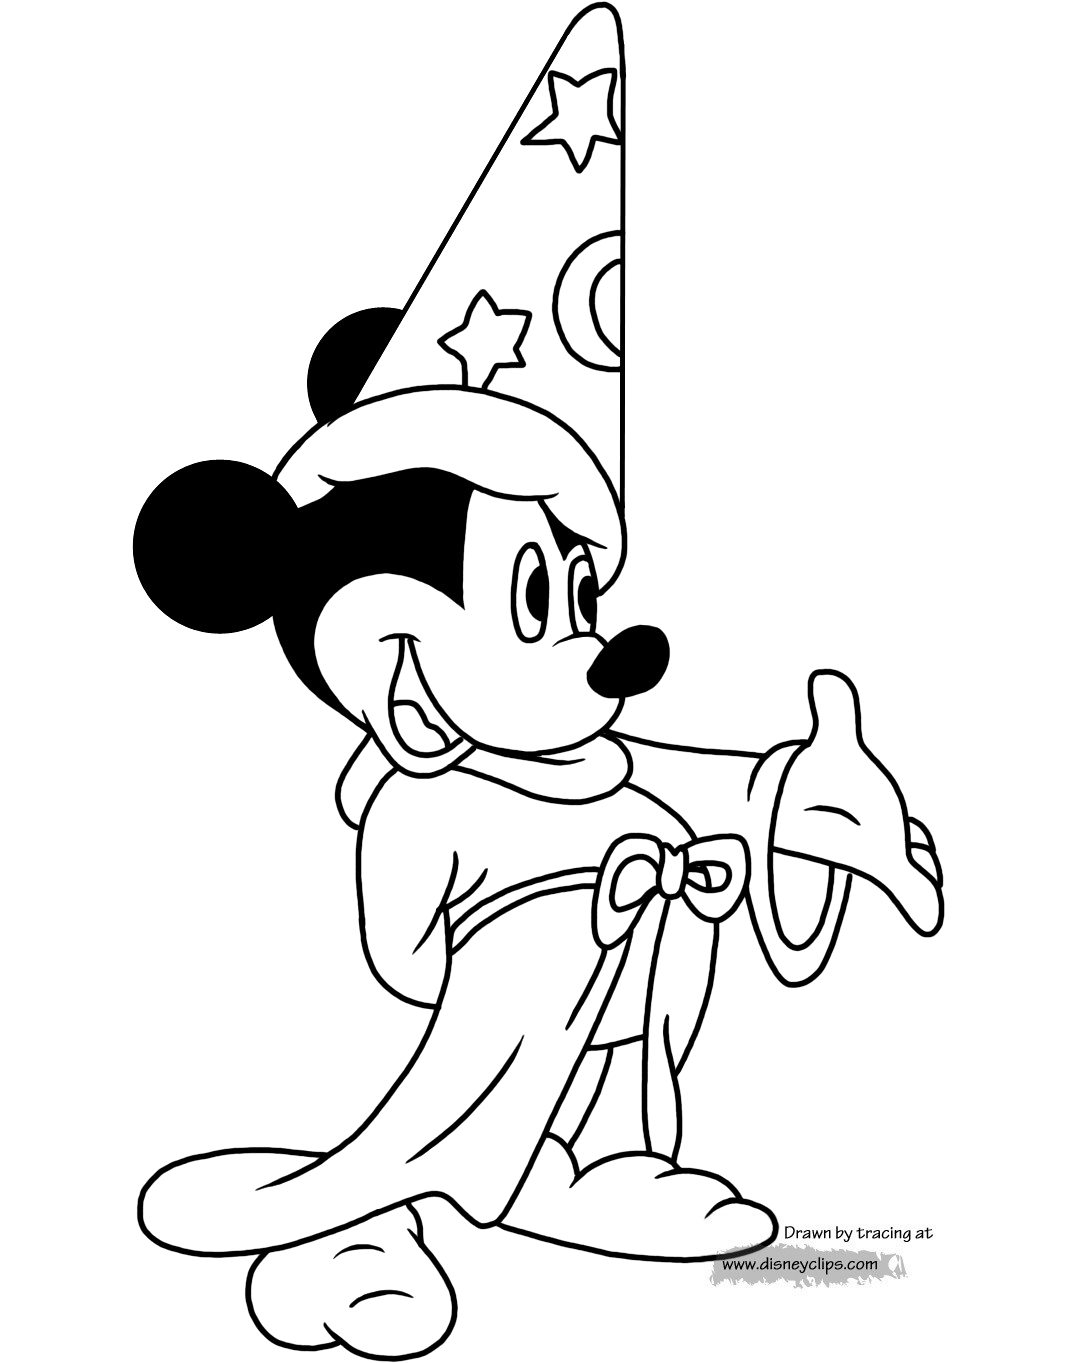 Fantasia Printable Coloring Pages | Disneyclips.com